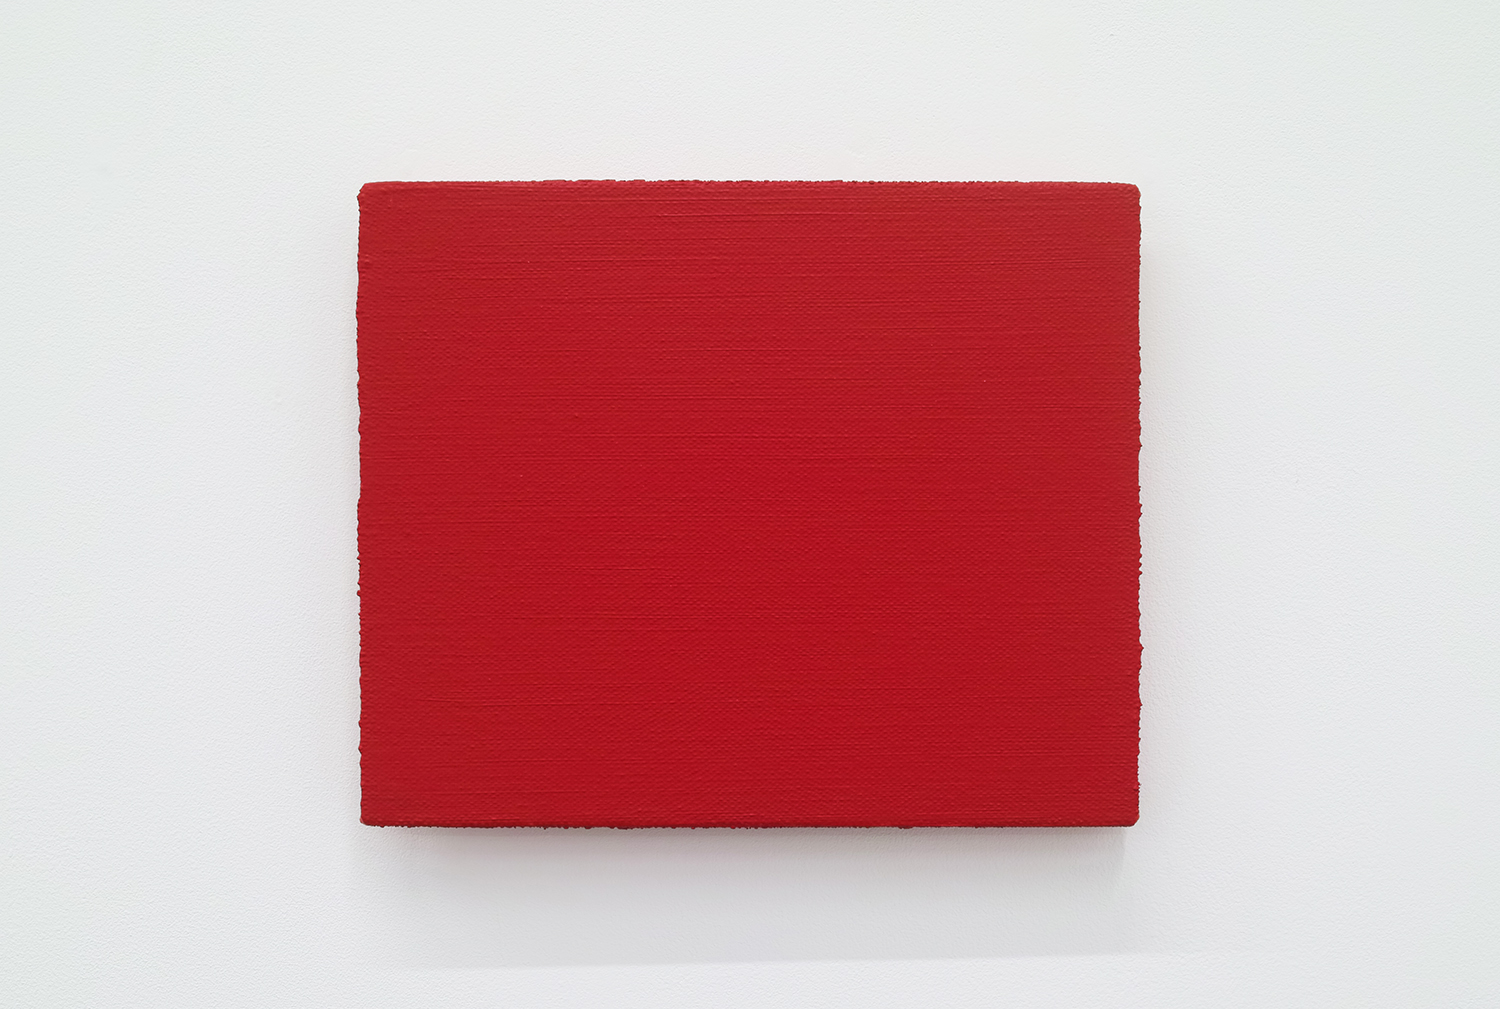 Text No. 668<br>pigment, acrylic, ink on wood,  185 x 225 x 22 mm,  2007